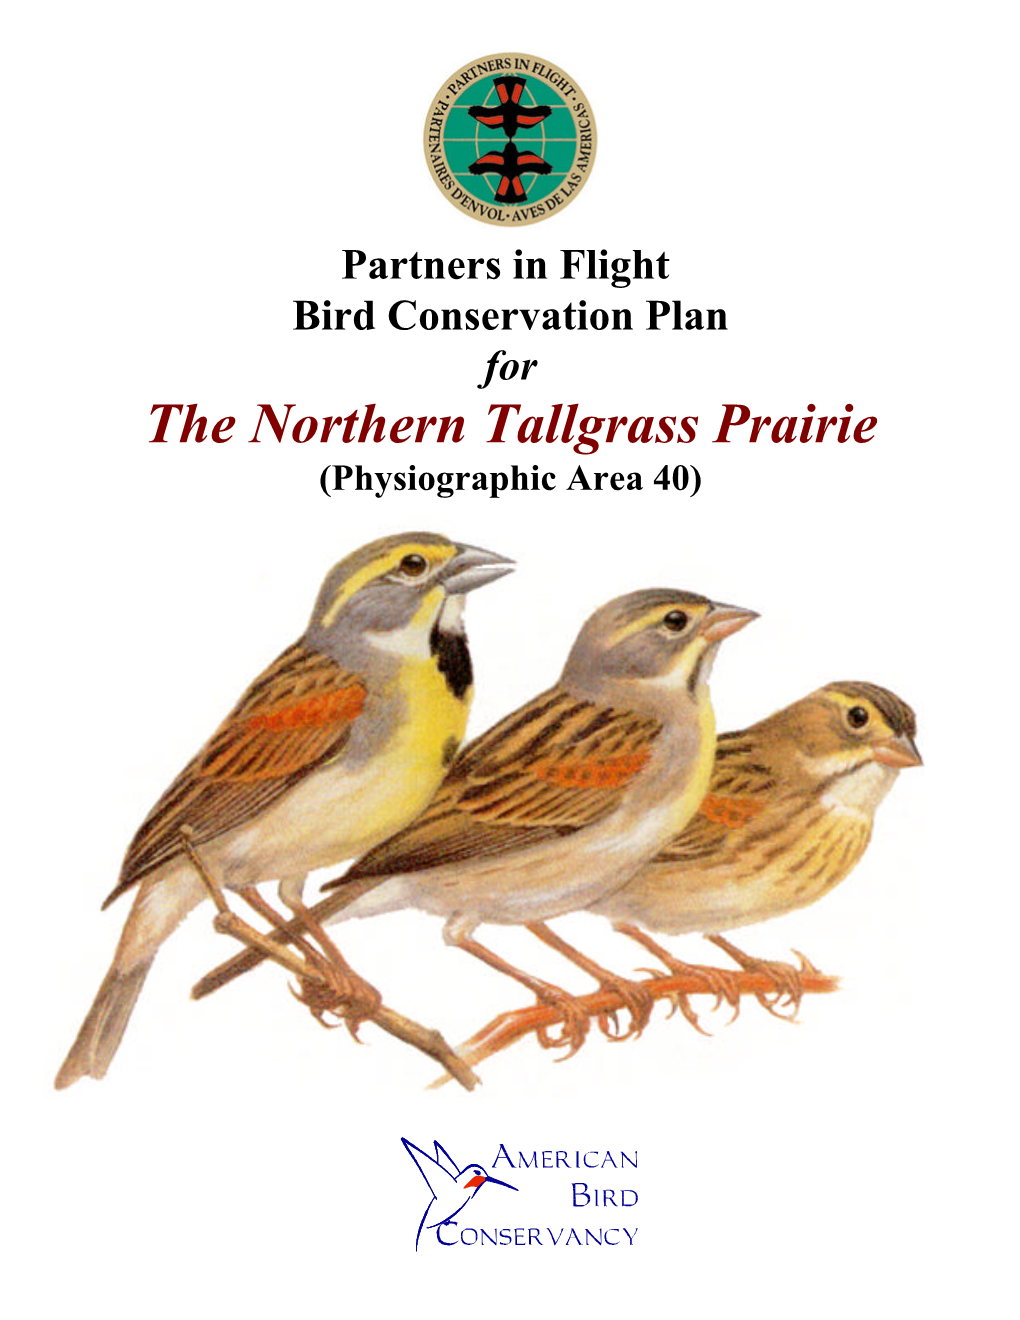 The Northern Tallgrass Prairie (Physiographic Area 40) Partners in Flight Bird Conservation Plan for the Northern Tallgrass Prairie (Physiographic Area 40)